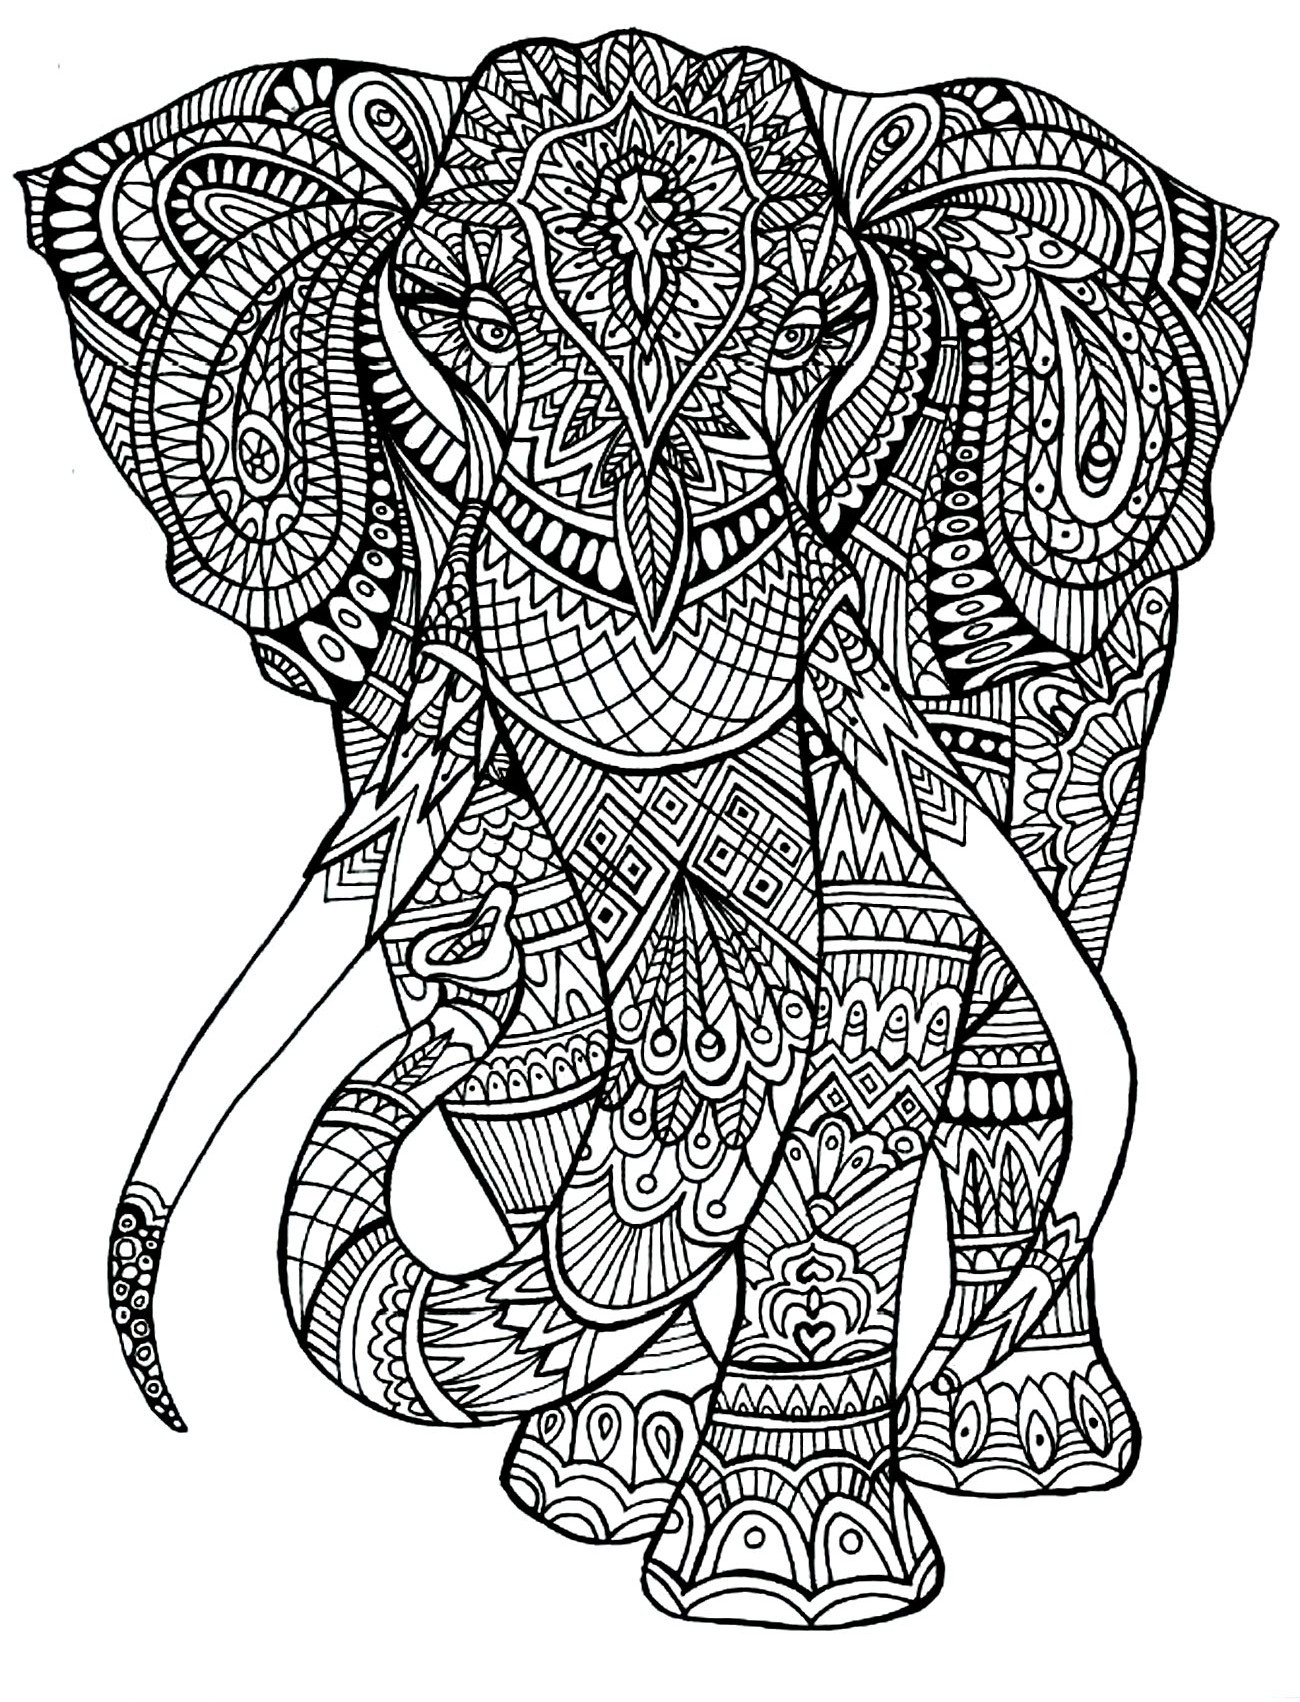 Coloring Pages For Adults Patterns
 Everything You Need to Know About Adult Coloring